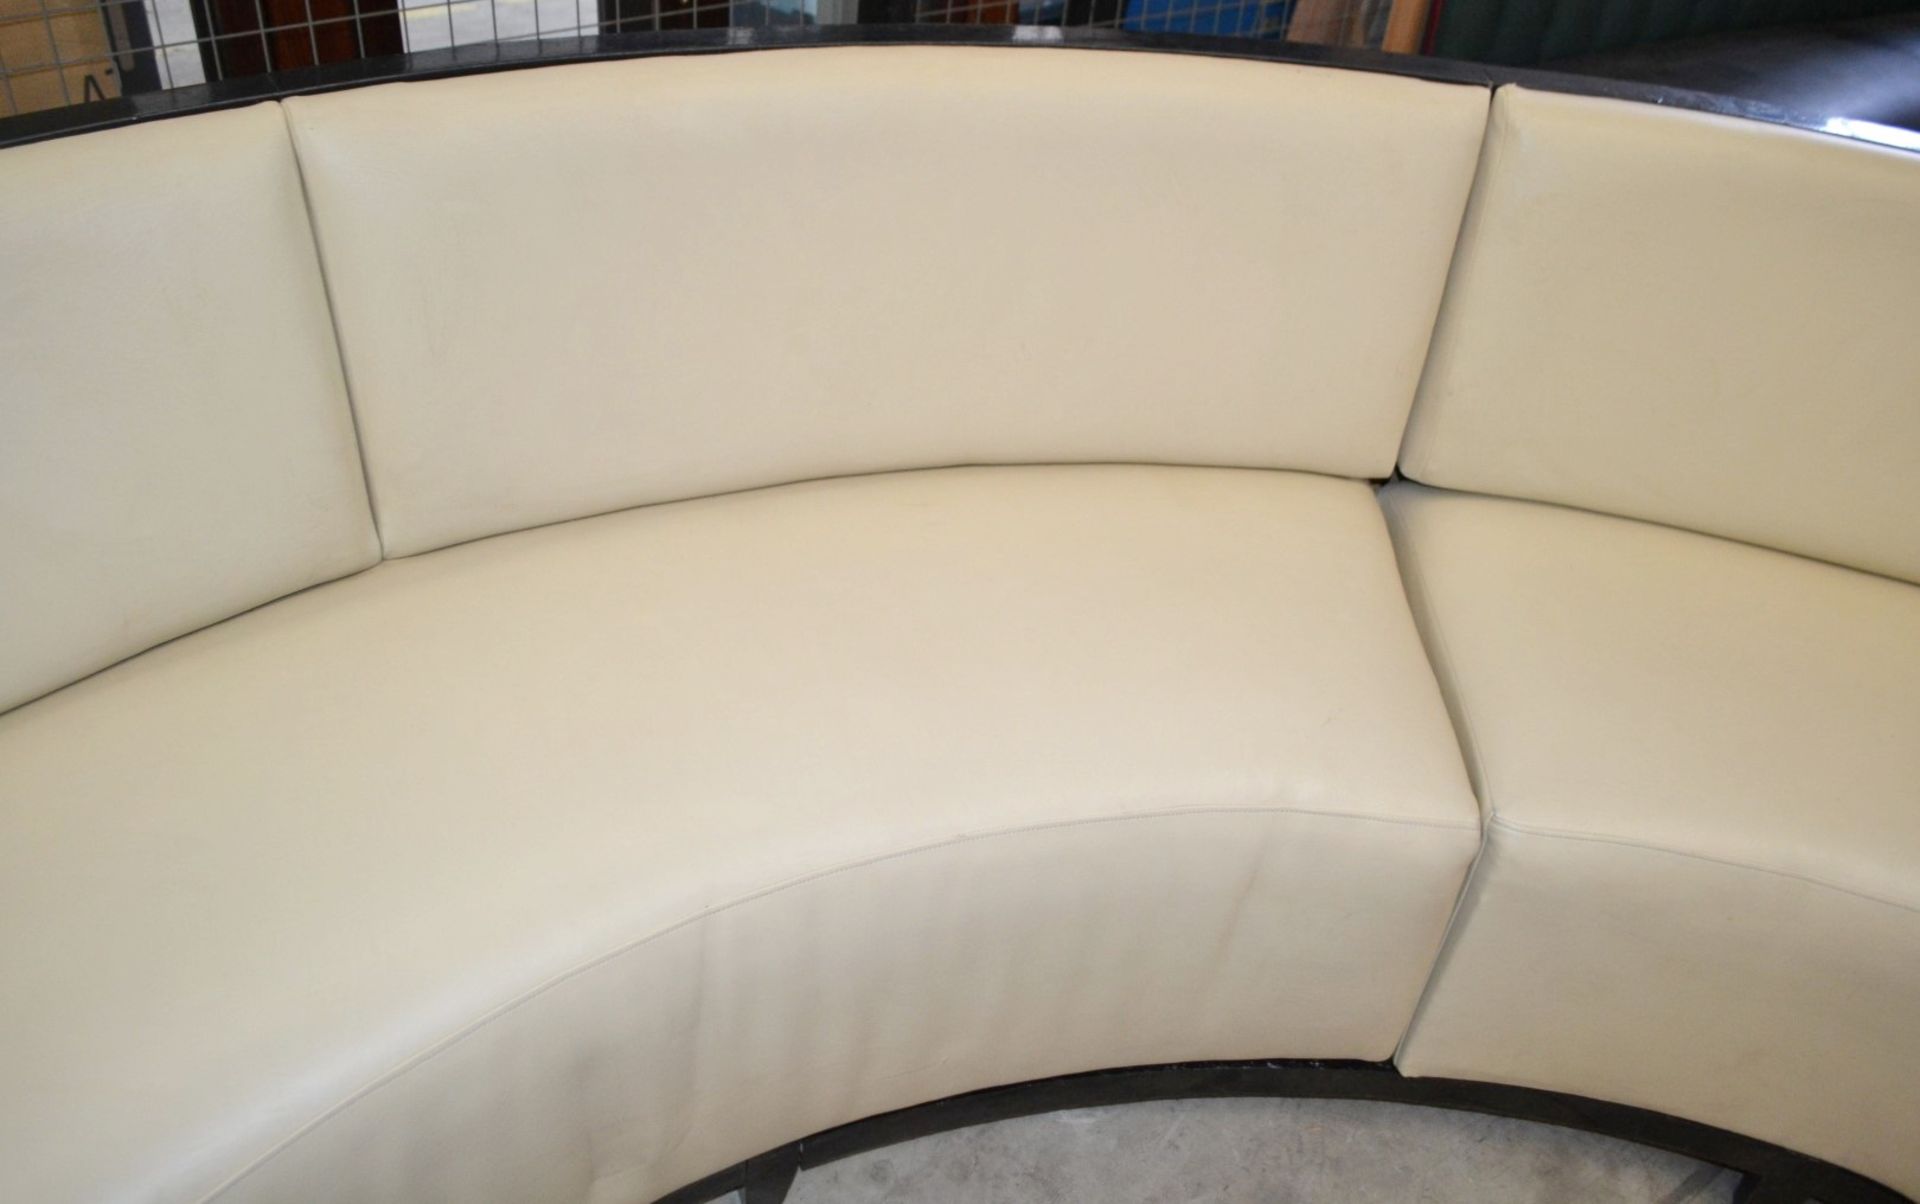 5 x Assorted Sections Of Curved Commercial Seating Upholstered In A Cream Faux Leather - Image 10 of 23